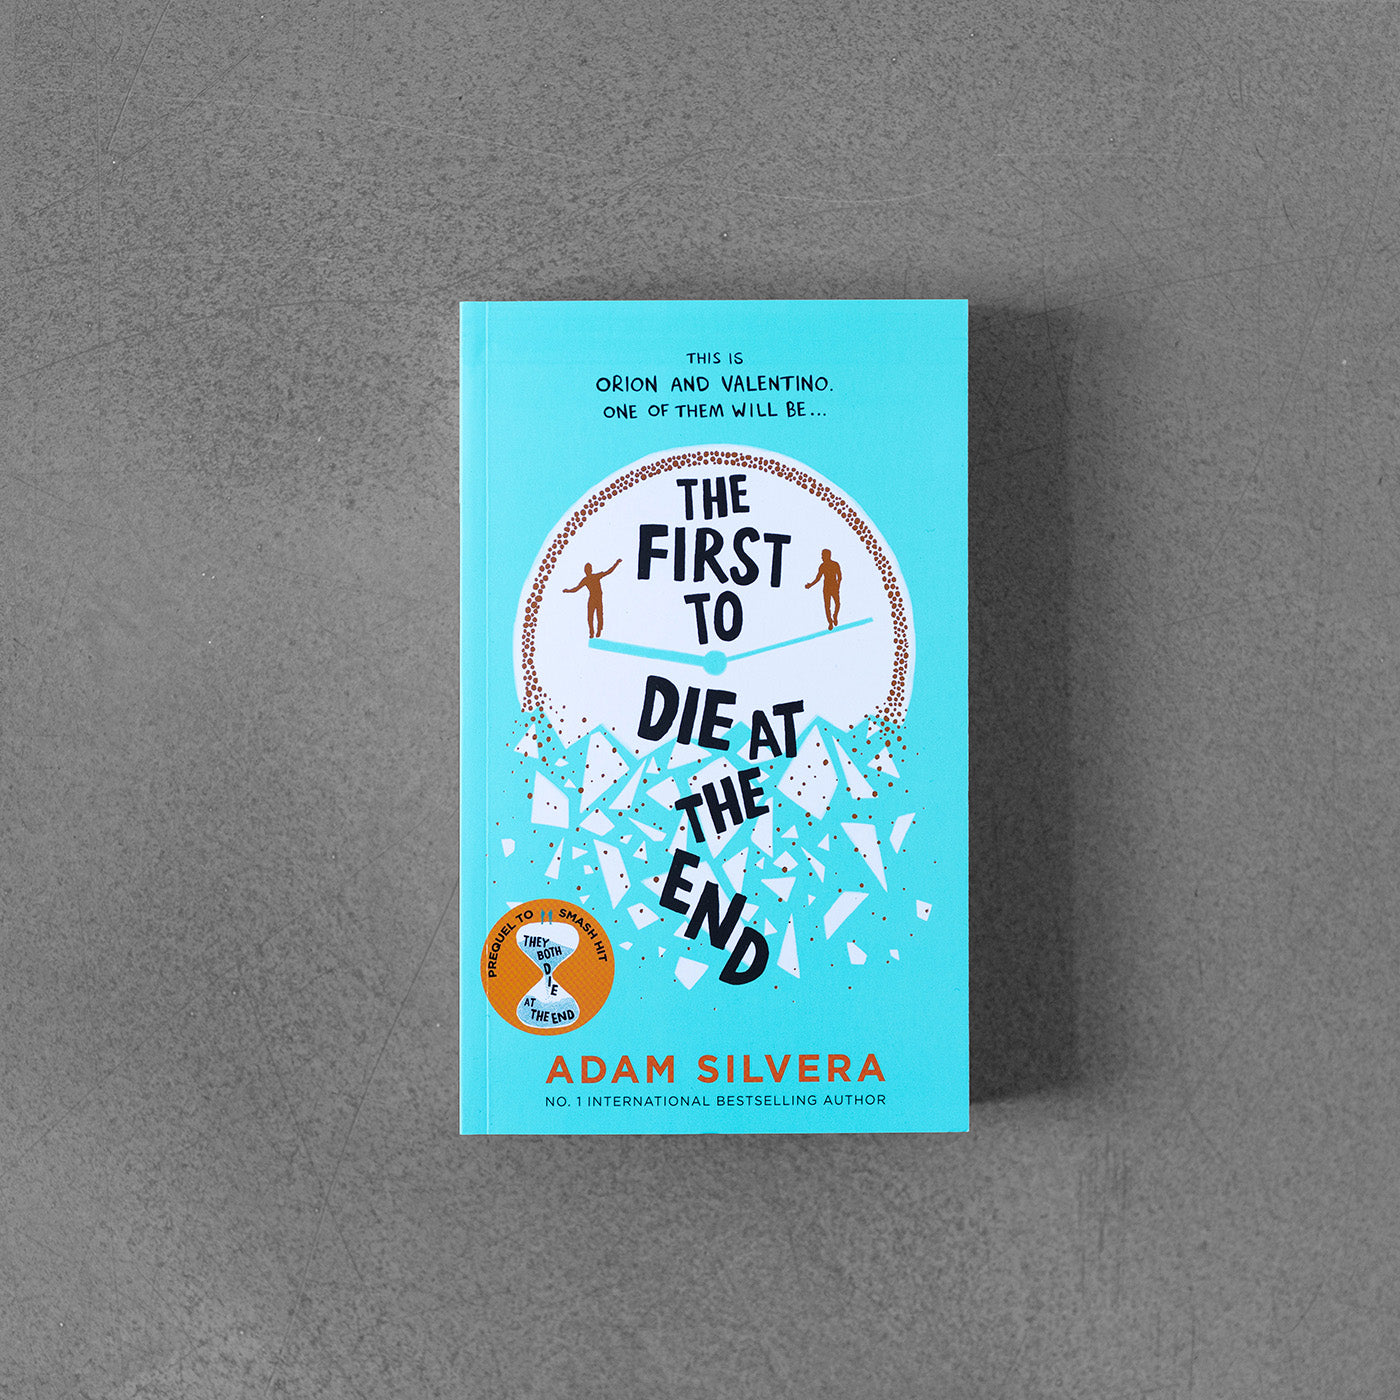 First to Die at the End, Adam Silvera